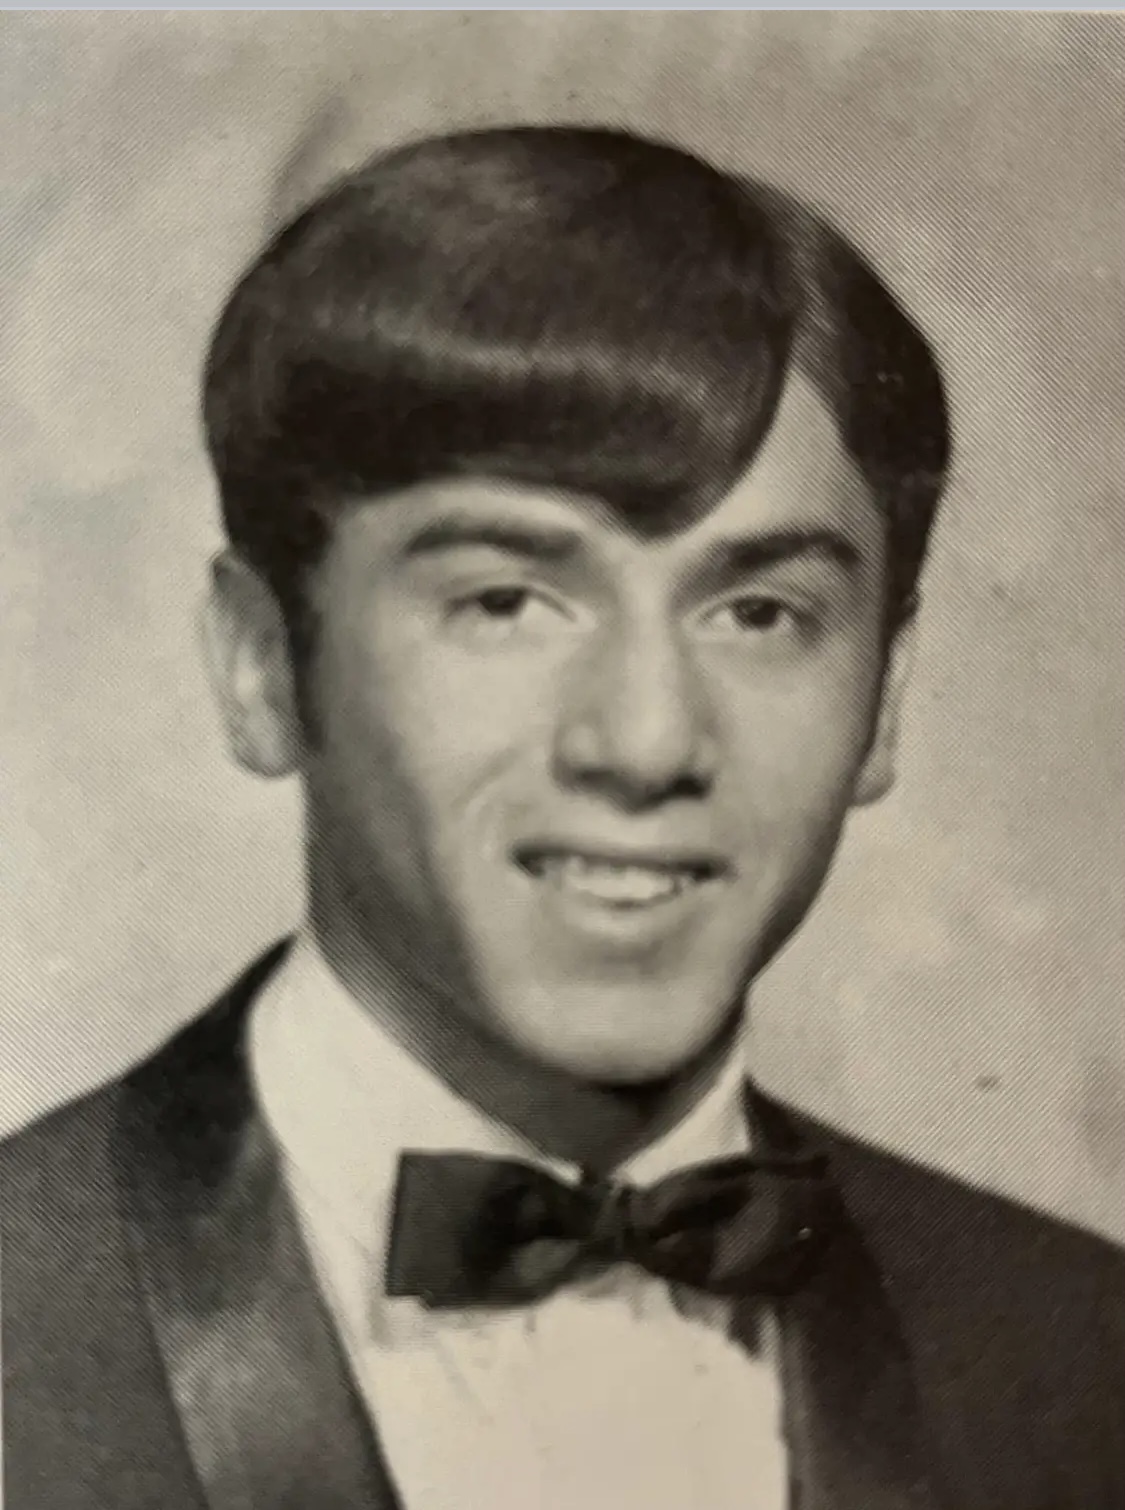 Mike had many friends growing up in Tampa, attending Pierce Junior High and Leto High. Here is his photo from Leto’s class of 1971.